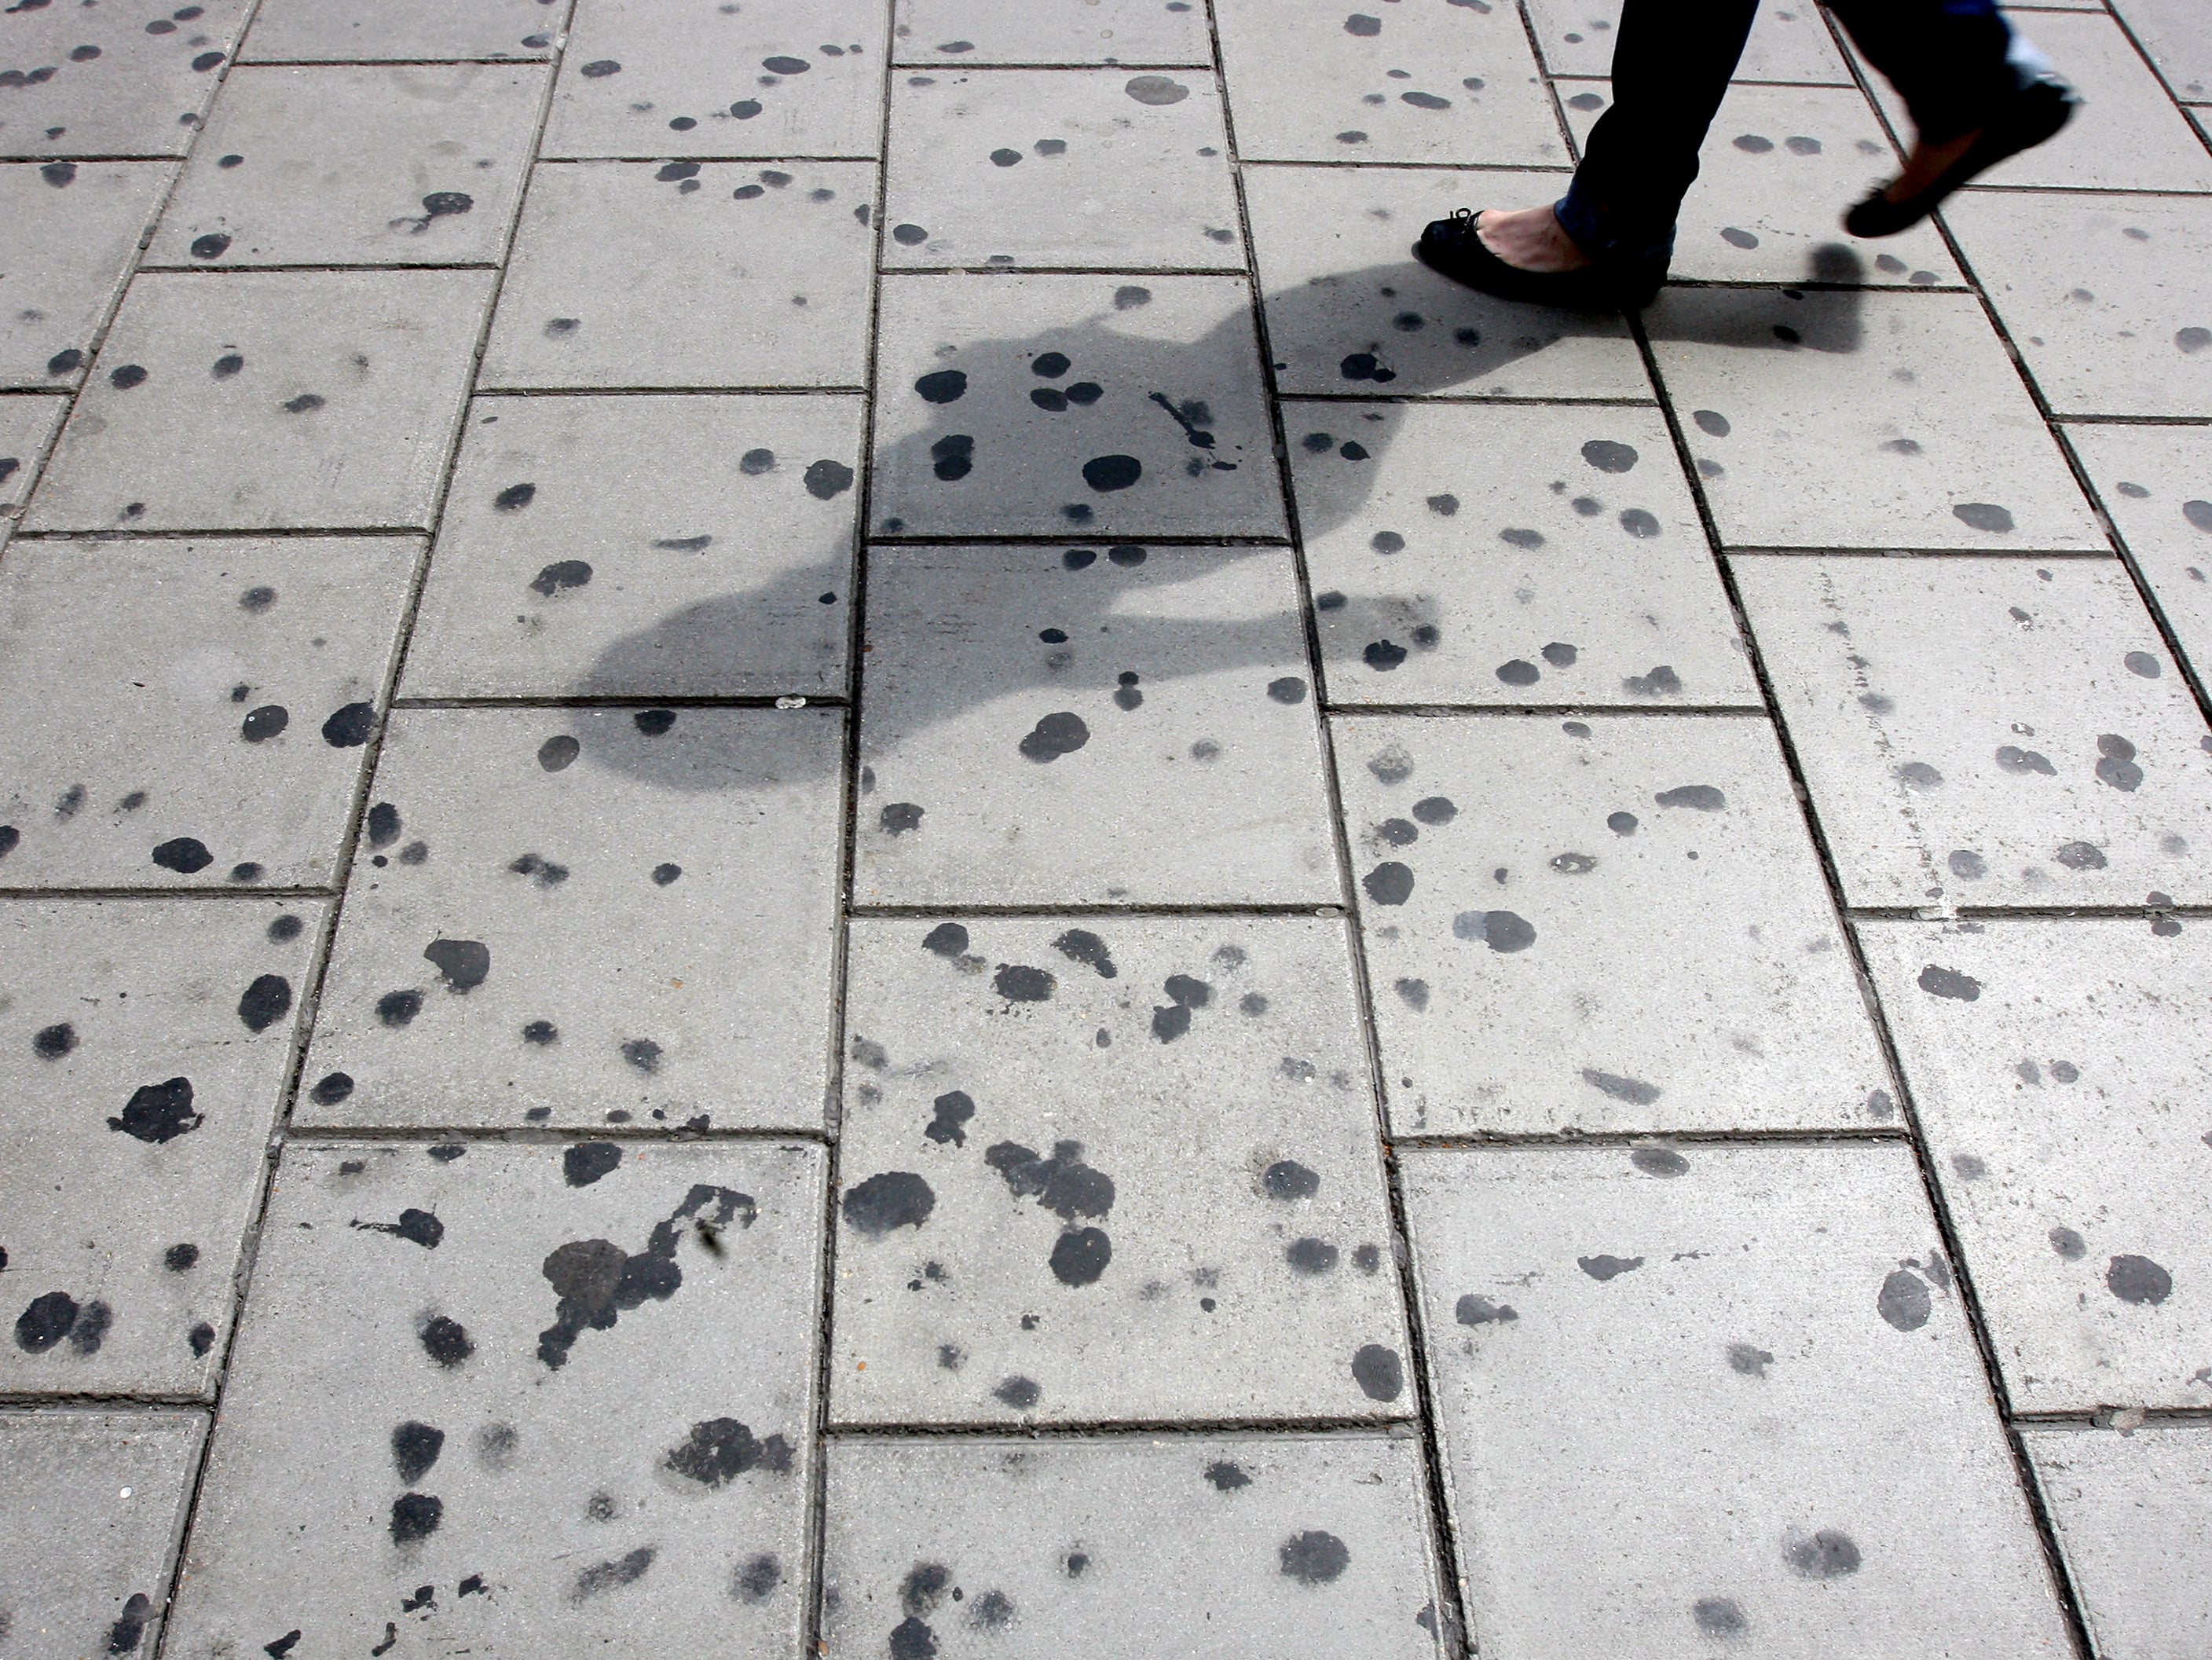 A woman walks by a pavement covered in chewing gum on Oxford Circus in 2008